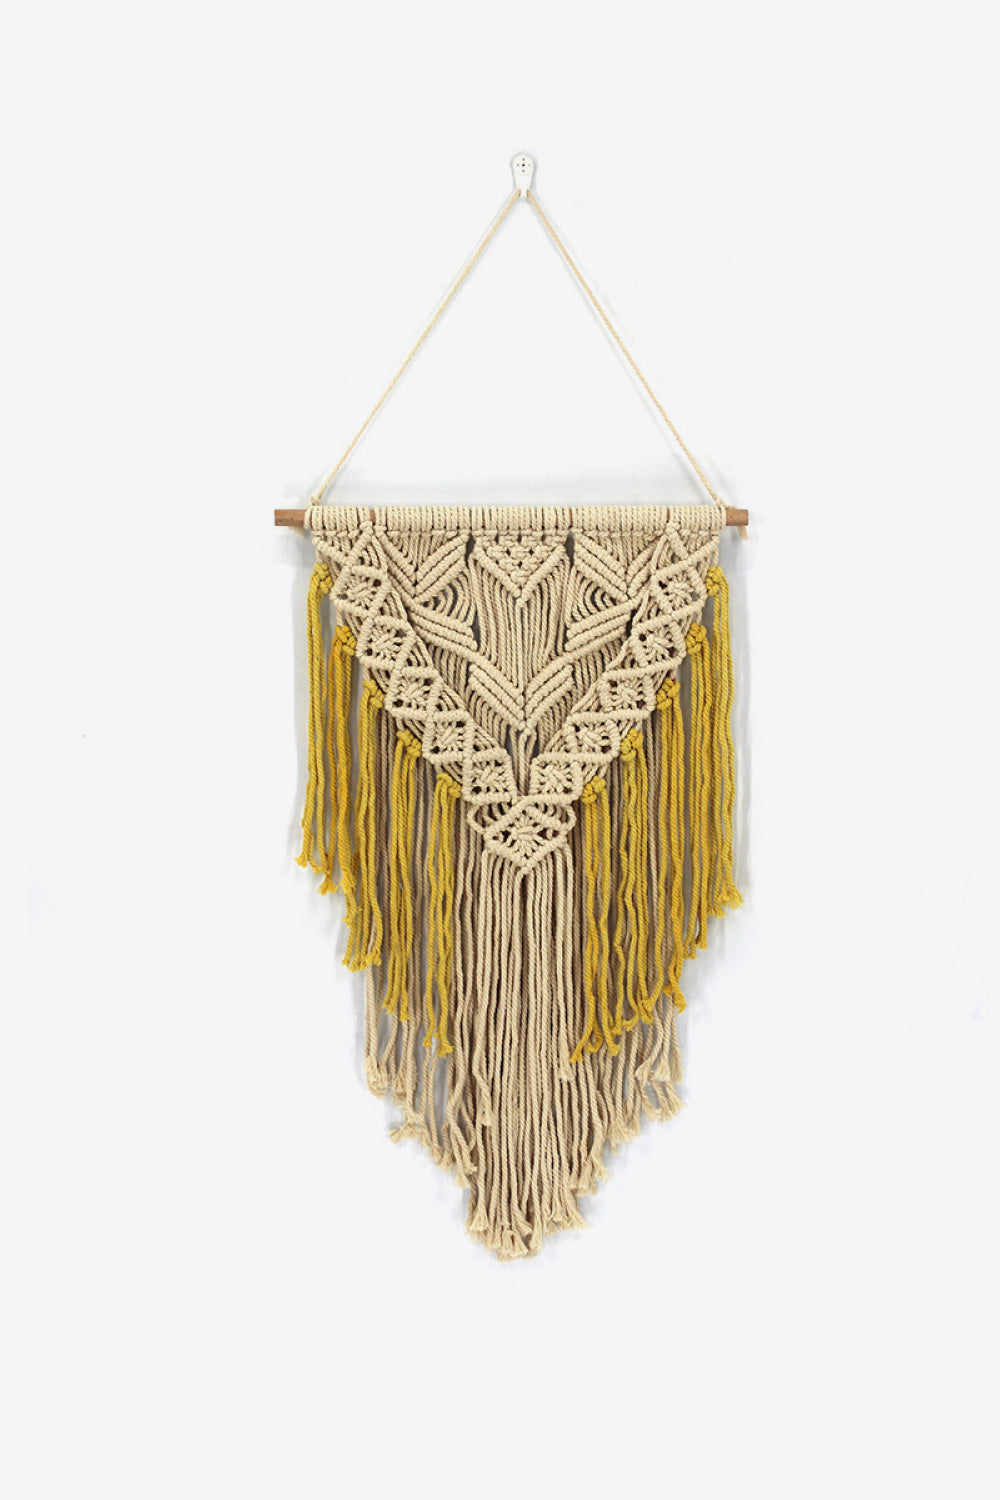 Contrast Fringe Macrame Wall Hanging Print on any thing USA/STOD clothes